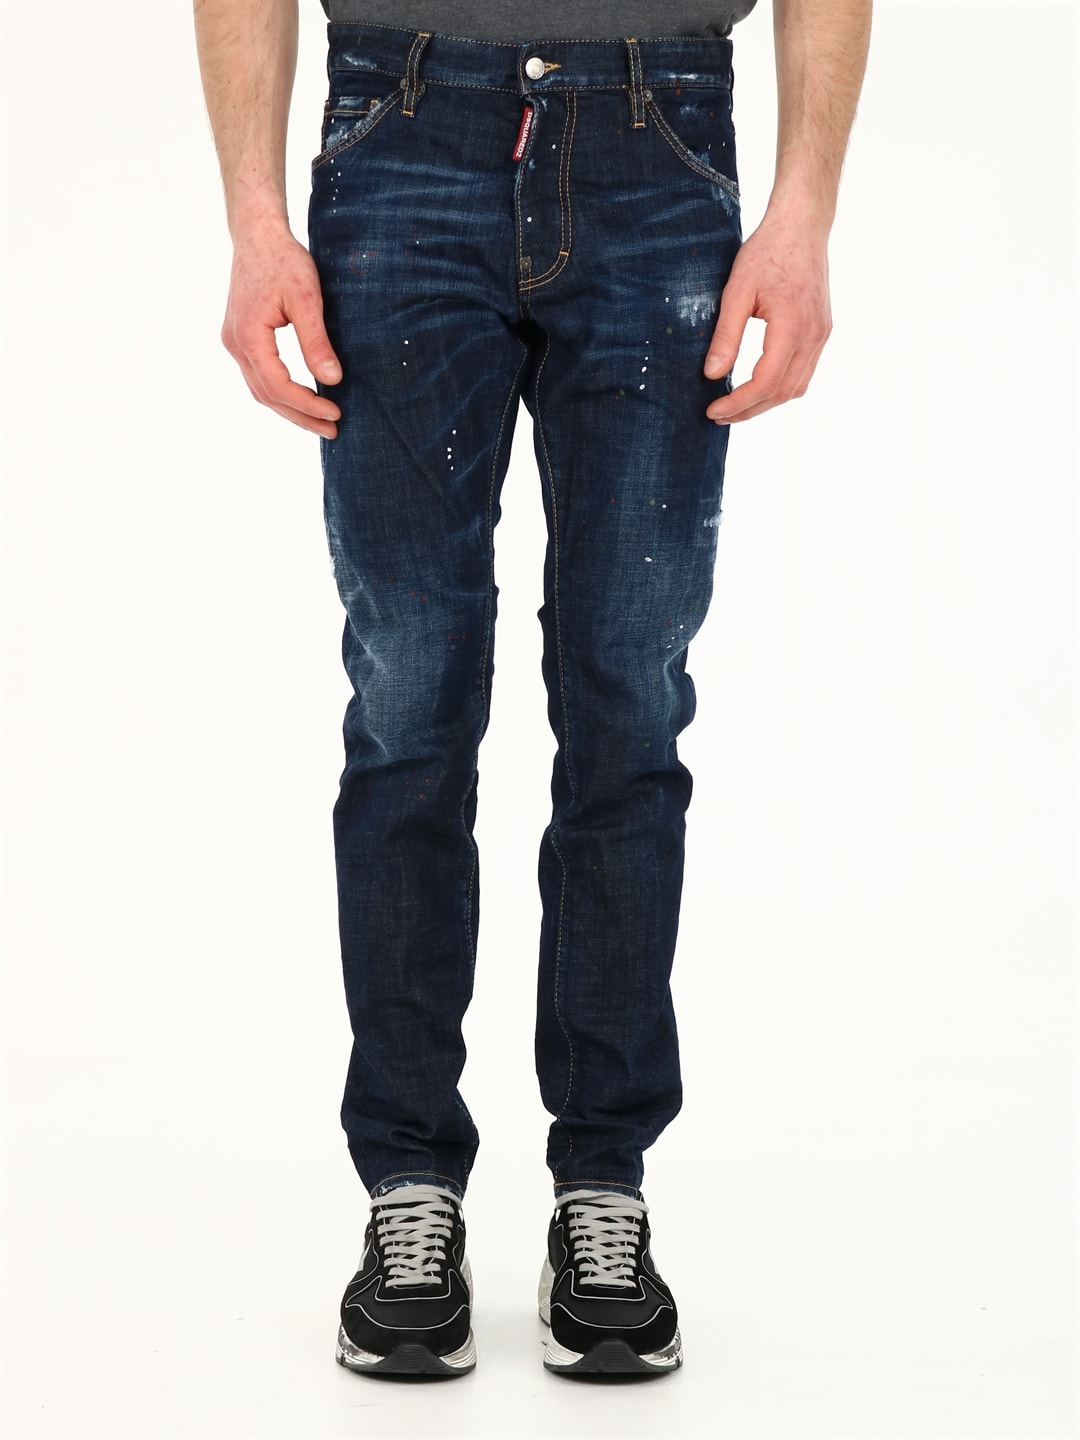 DSQUARED2 IBRA COOL GUY JEANS,11798125